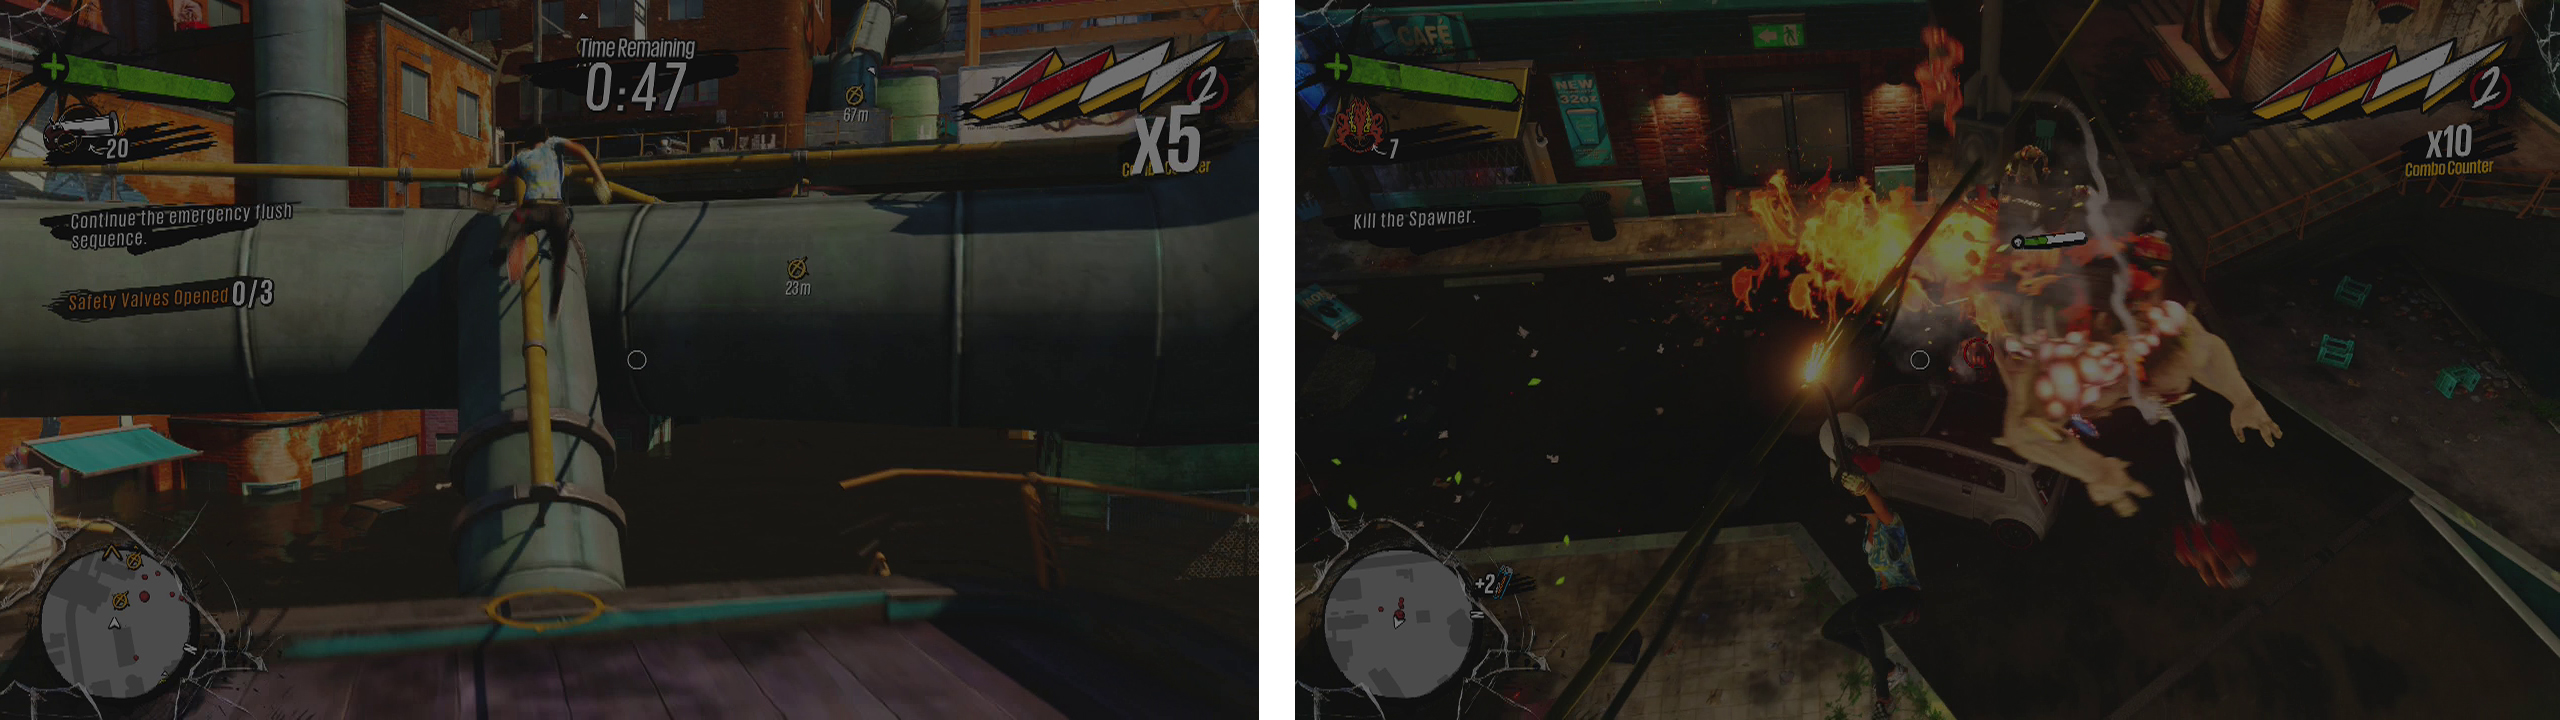 Repeat the valve interaction and grind process a second time (left). Destroy the Spawner that appears (right) during the third valve sequence.